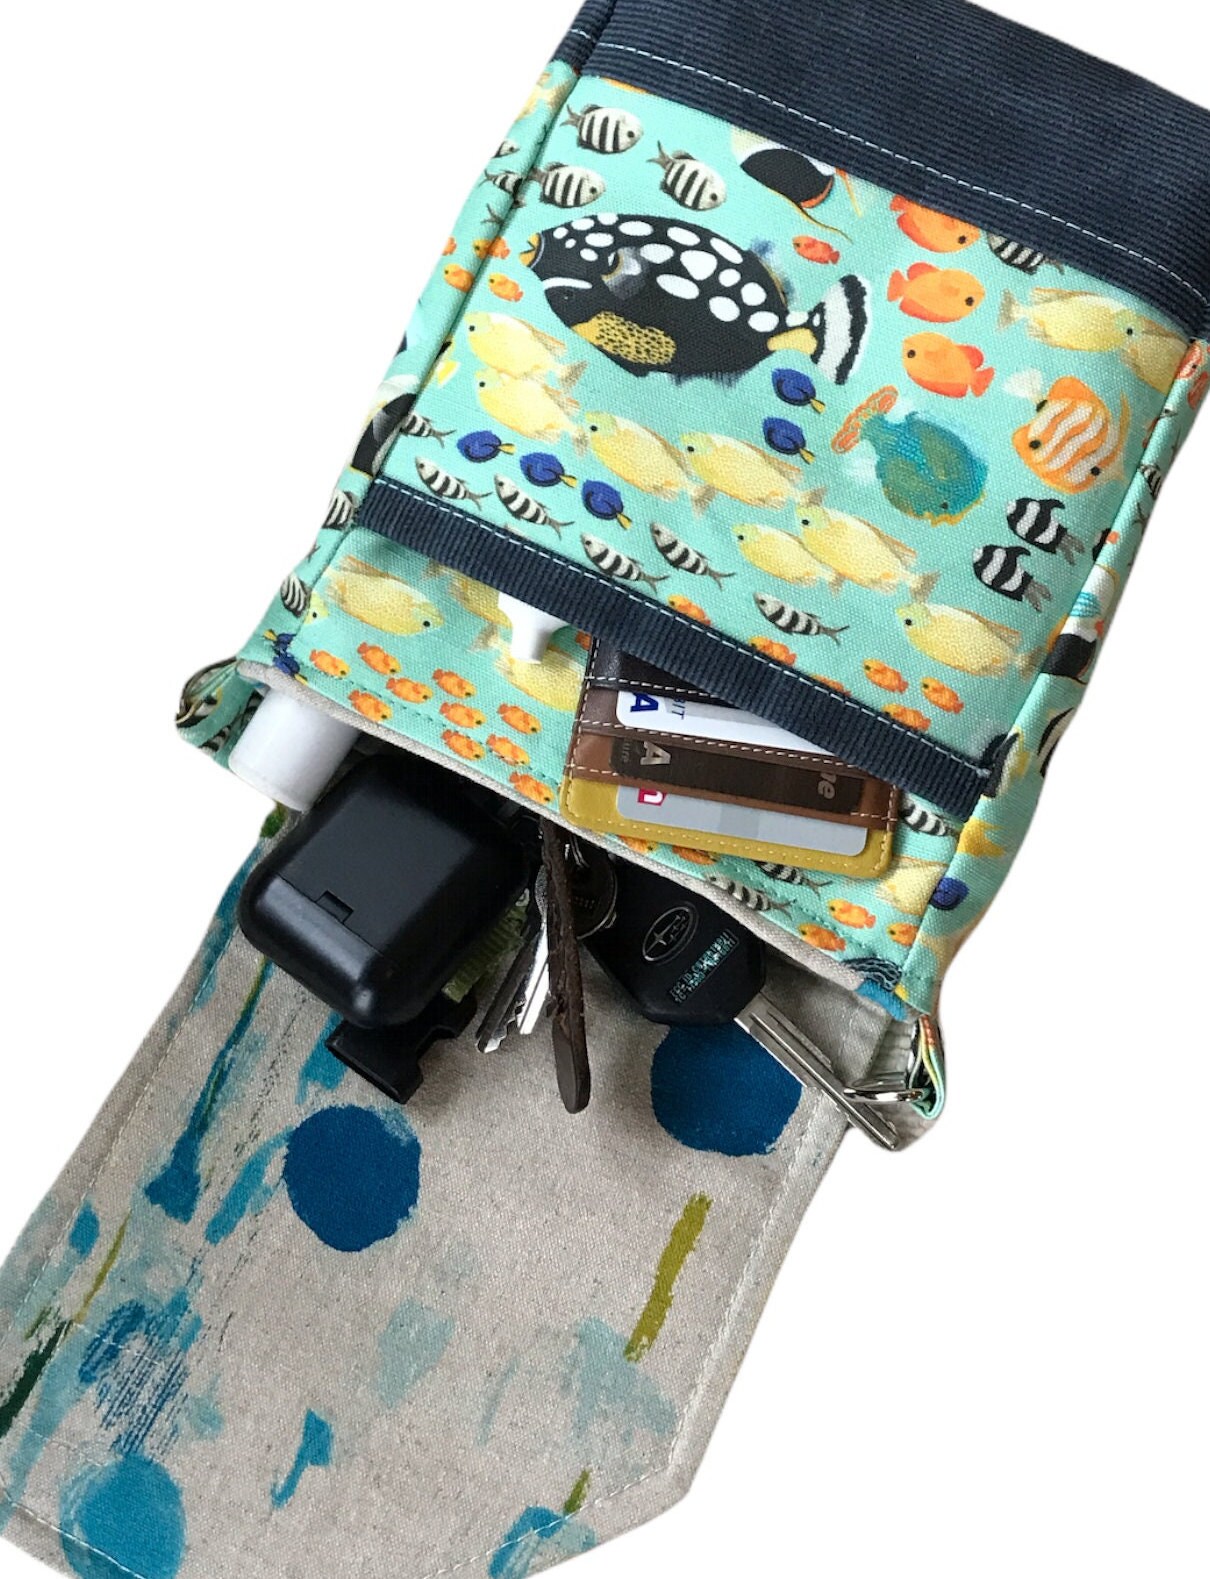 Tropical fish crossbody purse, linen body with waxed canvas base. It has an adjustable strap, two pockets + magnetic closure.